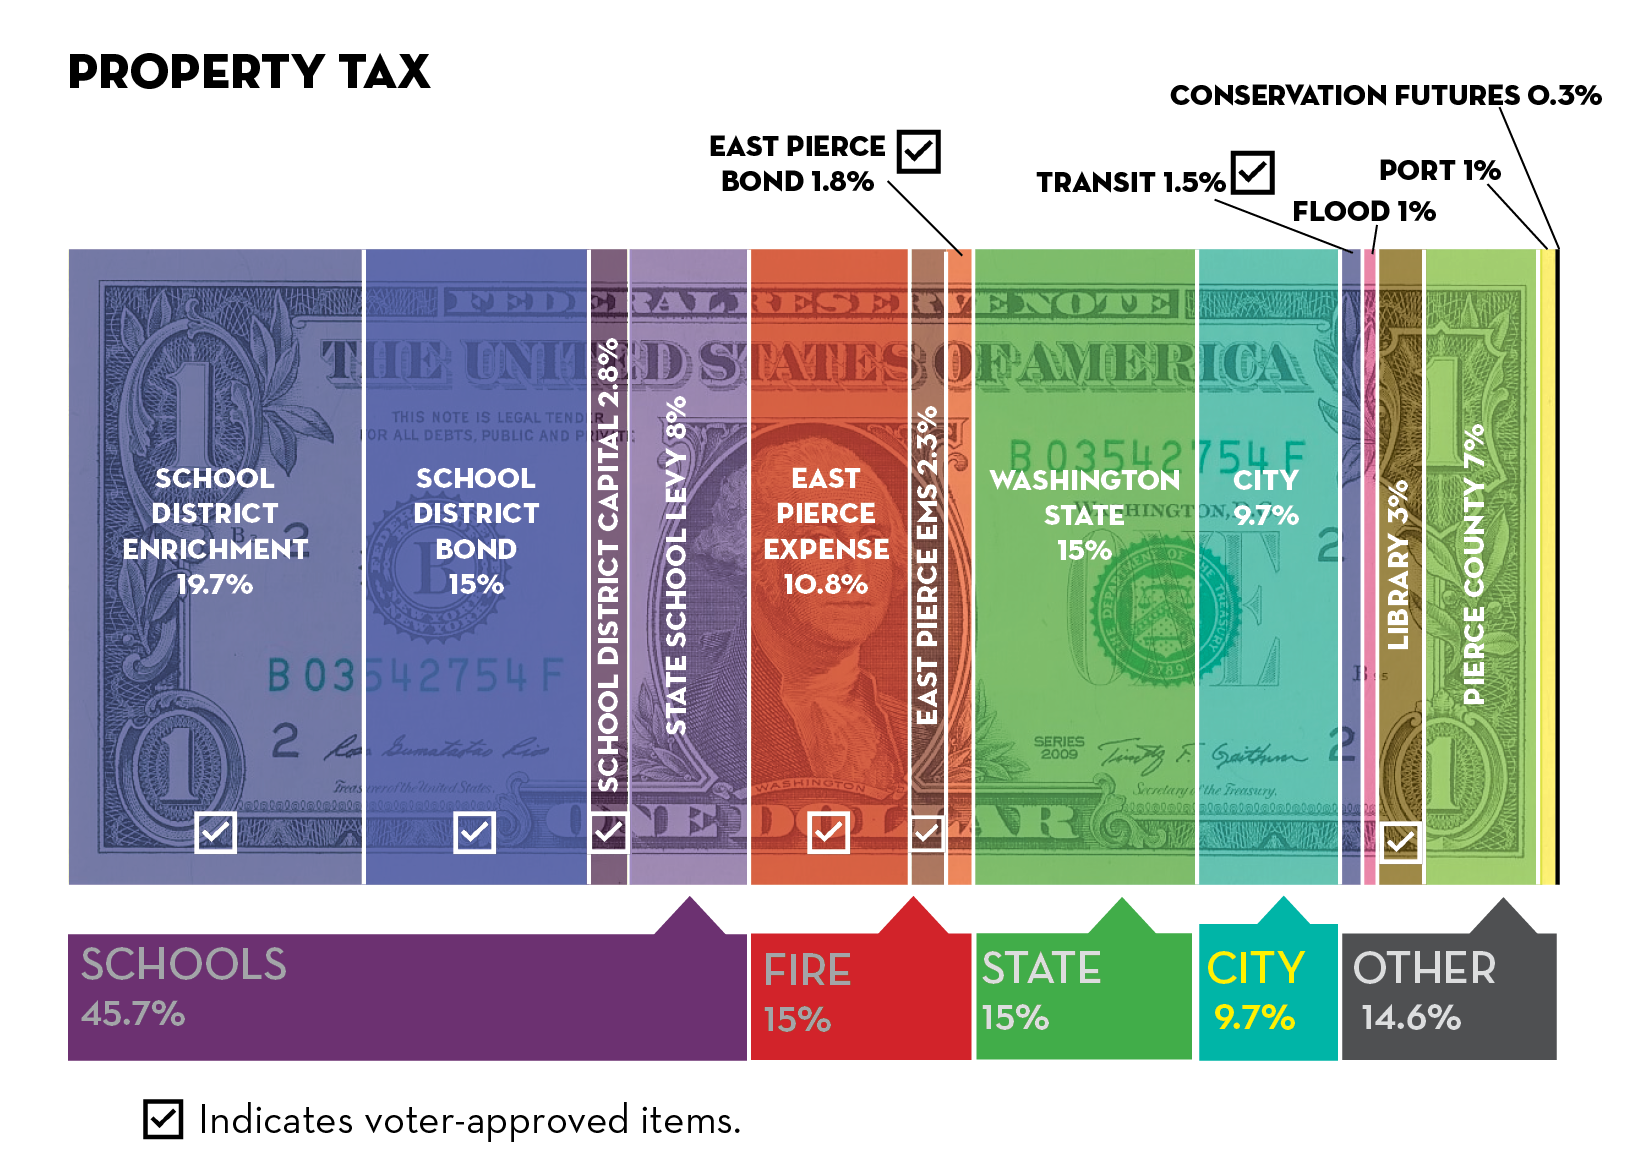 Chart of a dollar bill showing 19.7% of property tax goes to School District enrichment, 15% to School District bond, 2.8% to School District capital, 10.8% to East Pierce Fire Expense, 2.3% to East Pierce Fire EMS, 1.8% to East Pierce Fire Bond, 1.5% to Sound Transit, 3% to Library, 8% to State School Levy, 15% to Washington State, 9.7% to City of Sumner, 1% to Flood Control, 7% to Pierce County, 1% to Port of Tacoma and 0.3% to Conservation Futures.